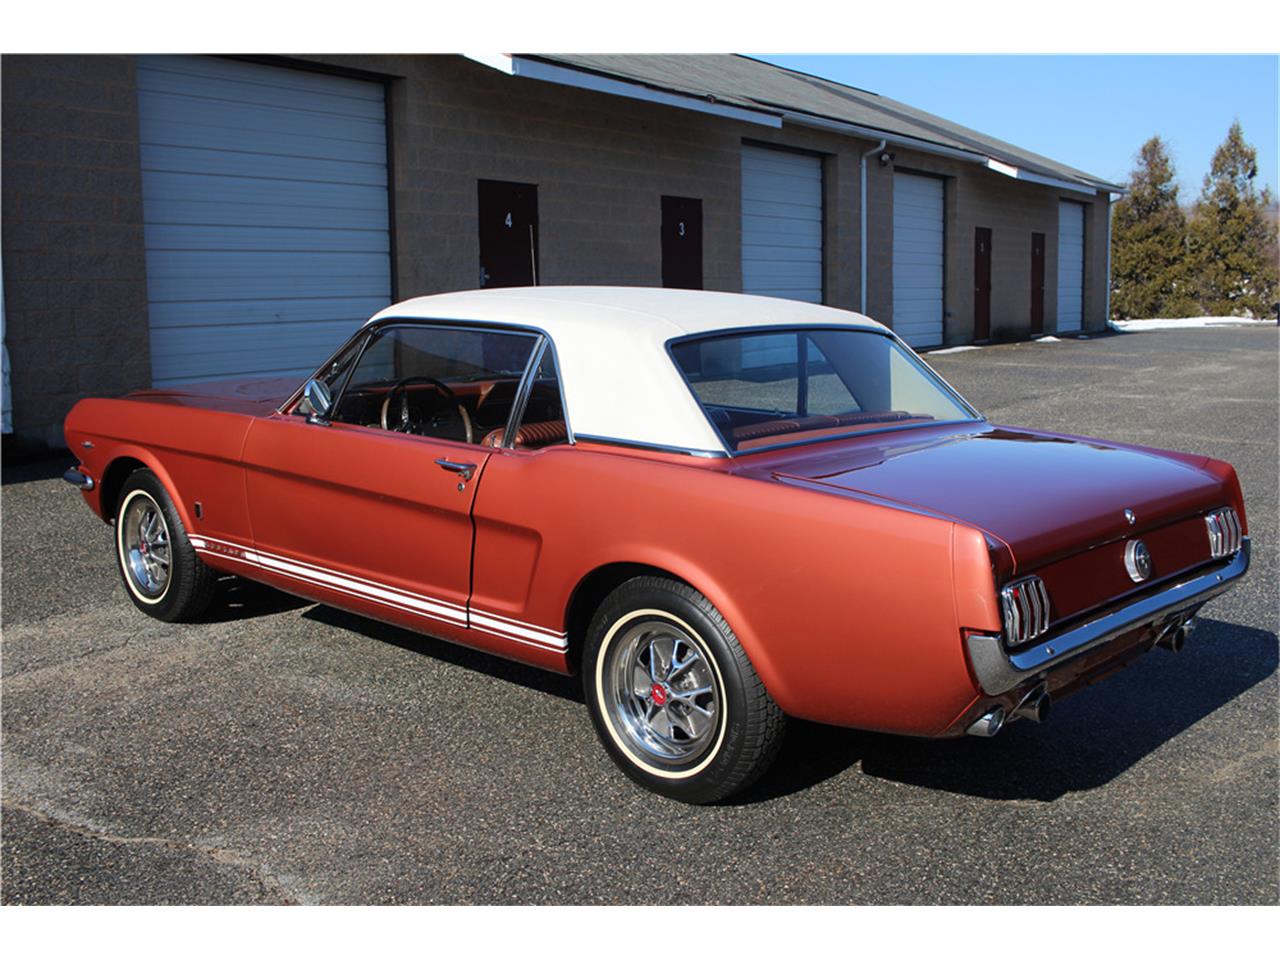 For Sale at Auction: 1966 Ford Mustang GT for sale in West Palm Beach, FL